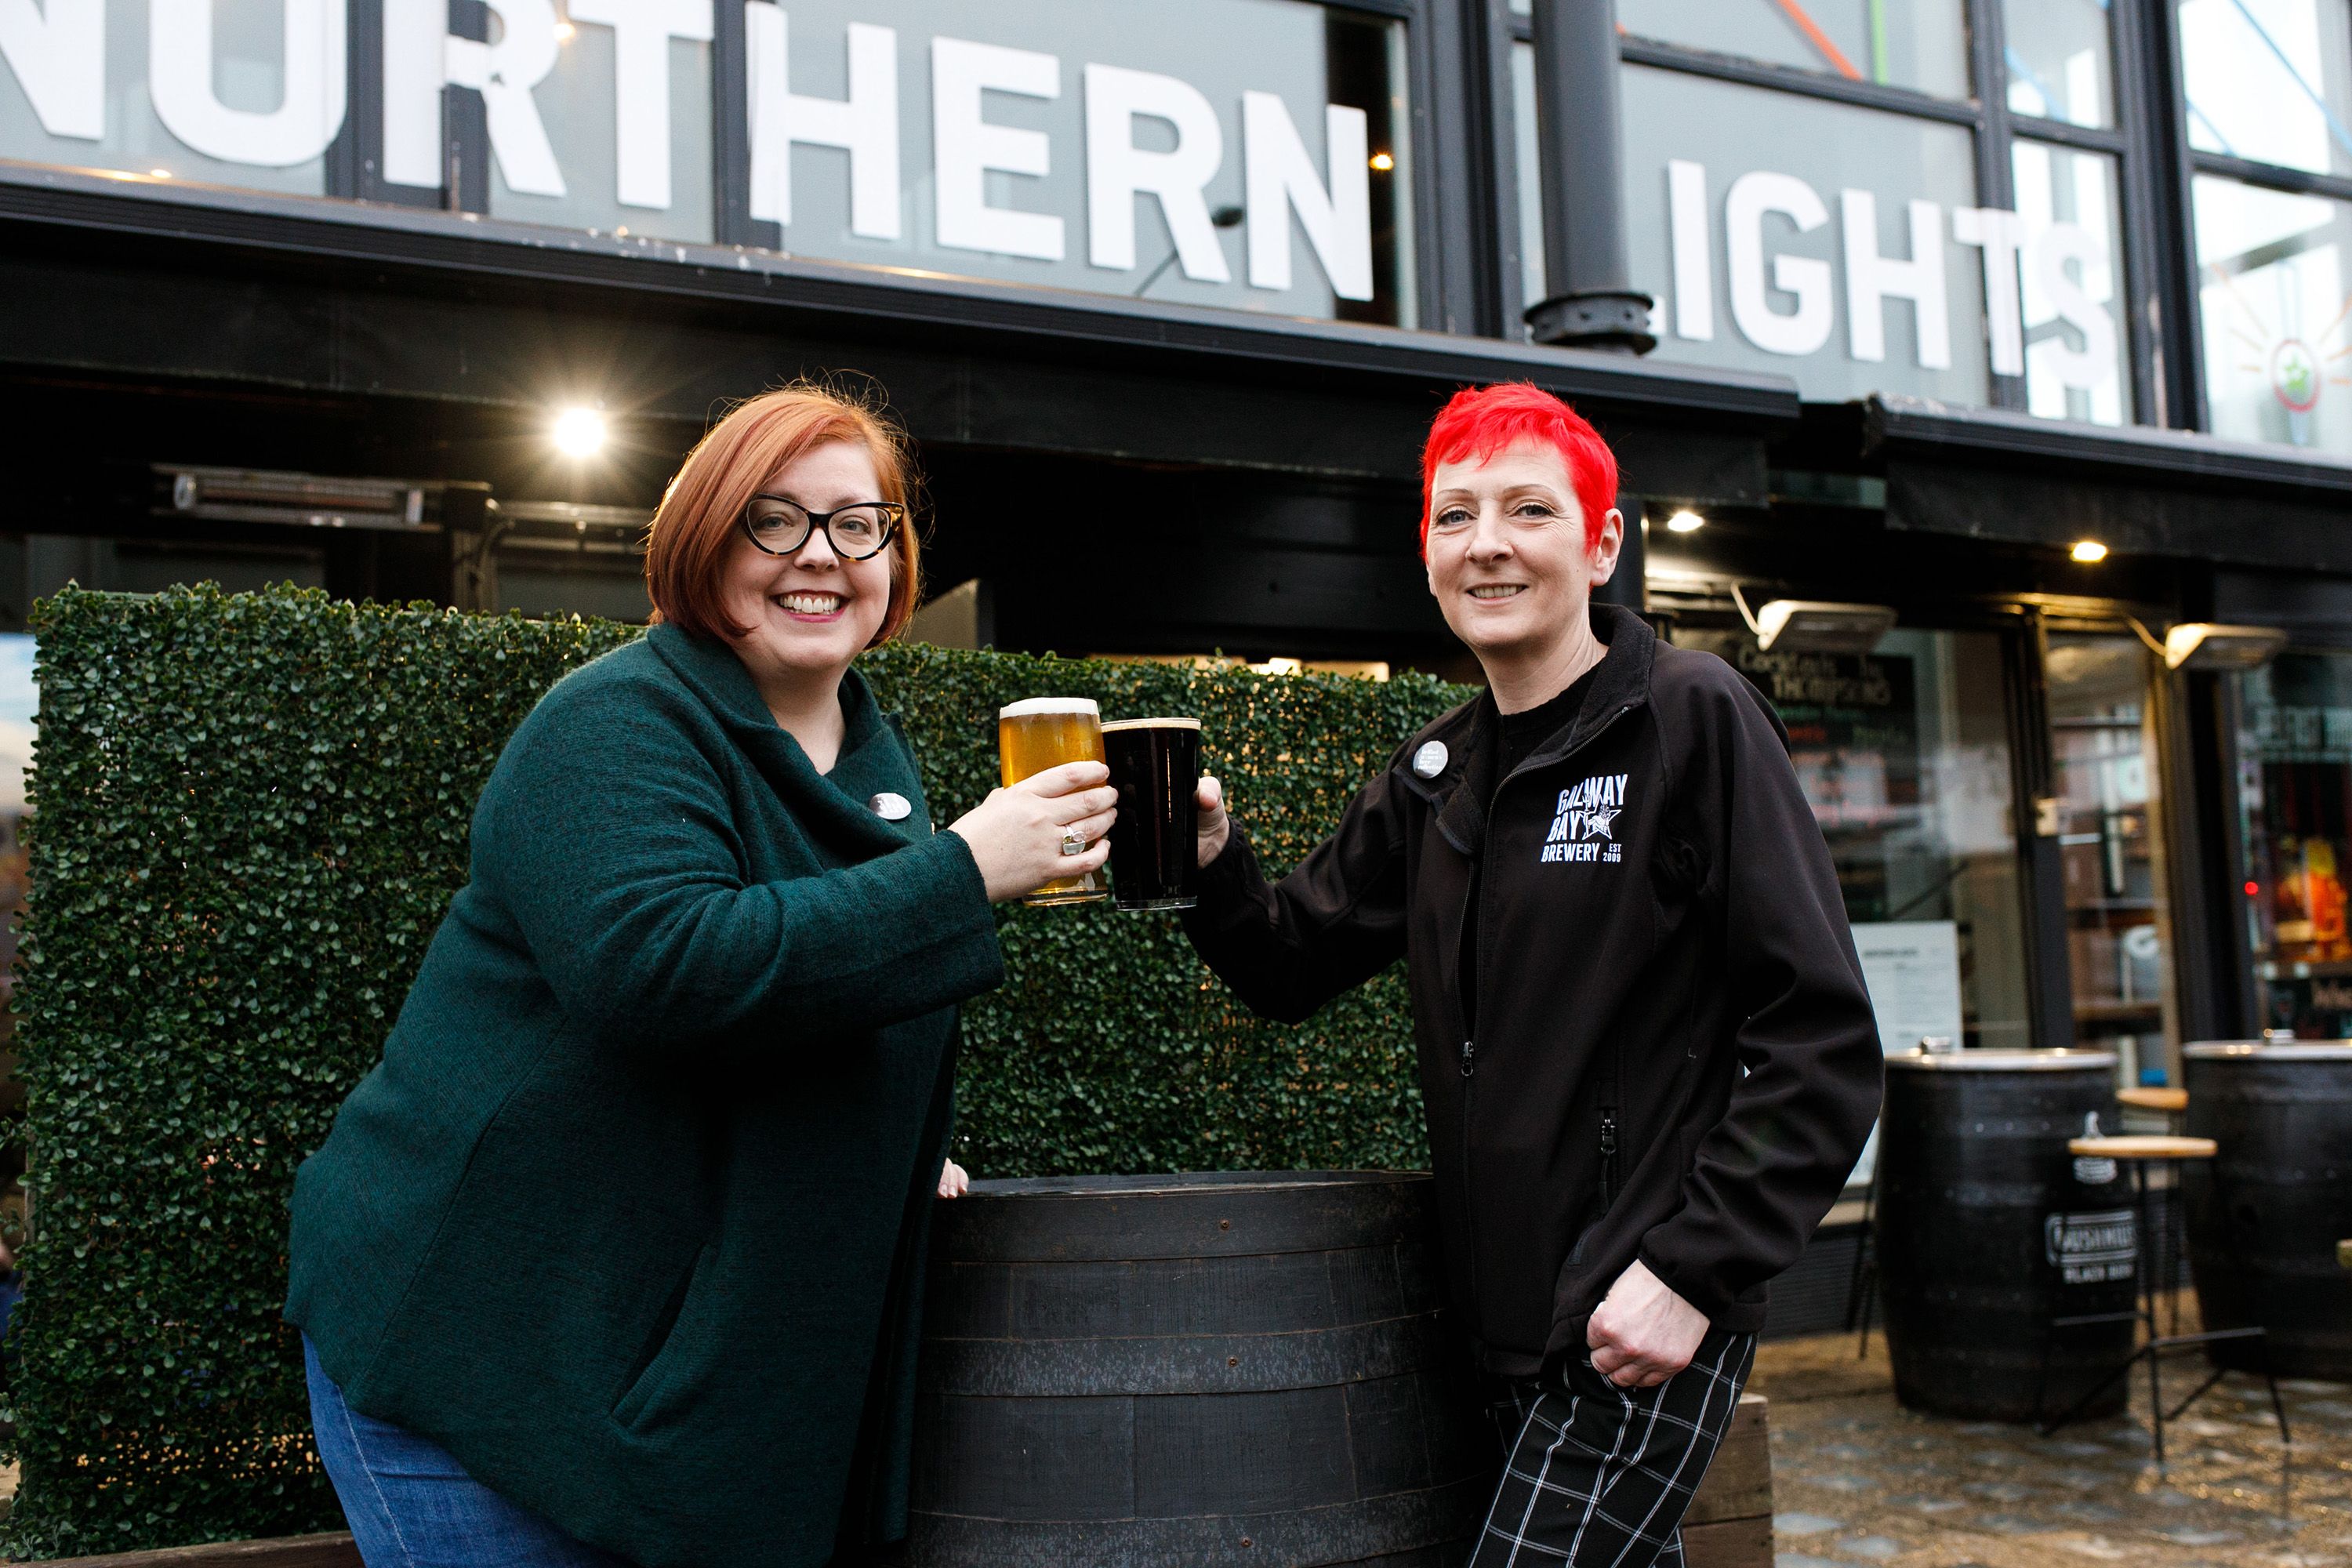 NEW BEER: Jennifer Noble of the Belfast Women’s Beer Collective and Sinead Cashman, Manager of Northern Lights Bar